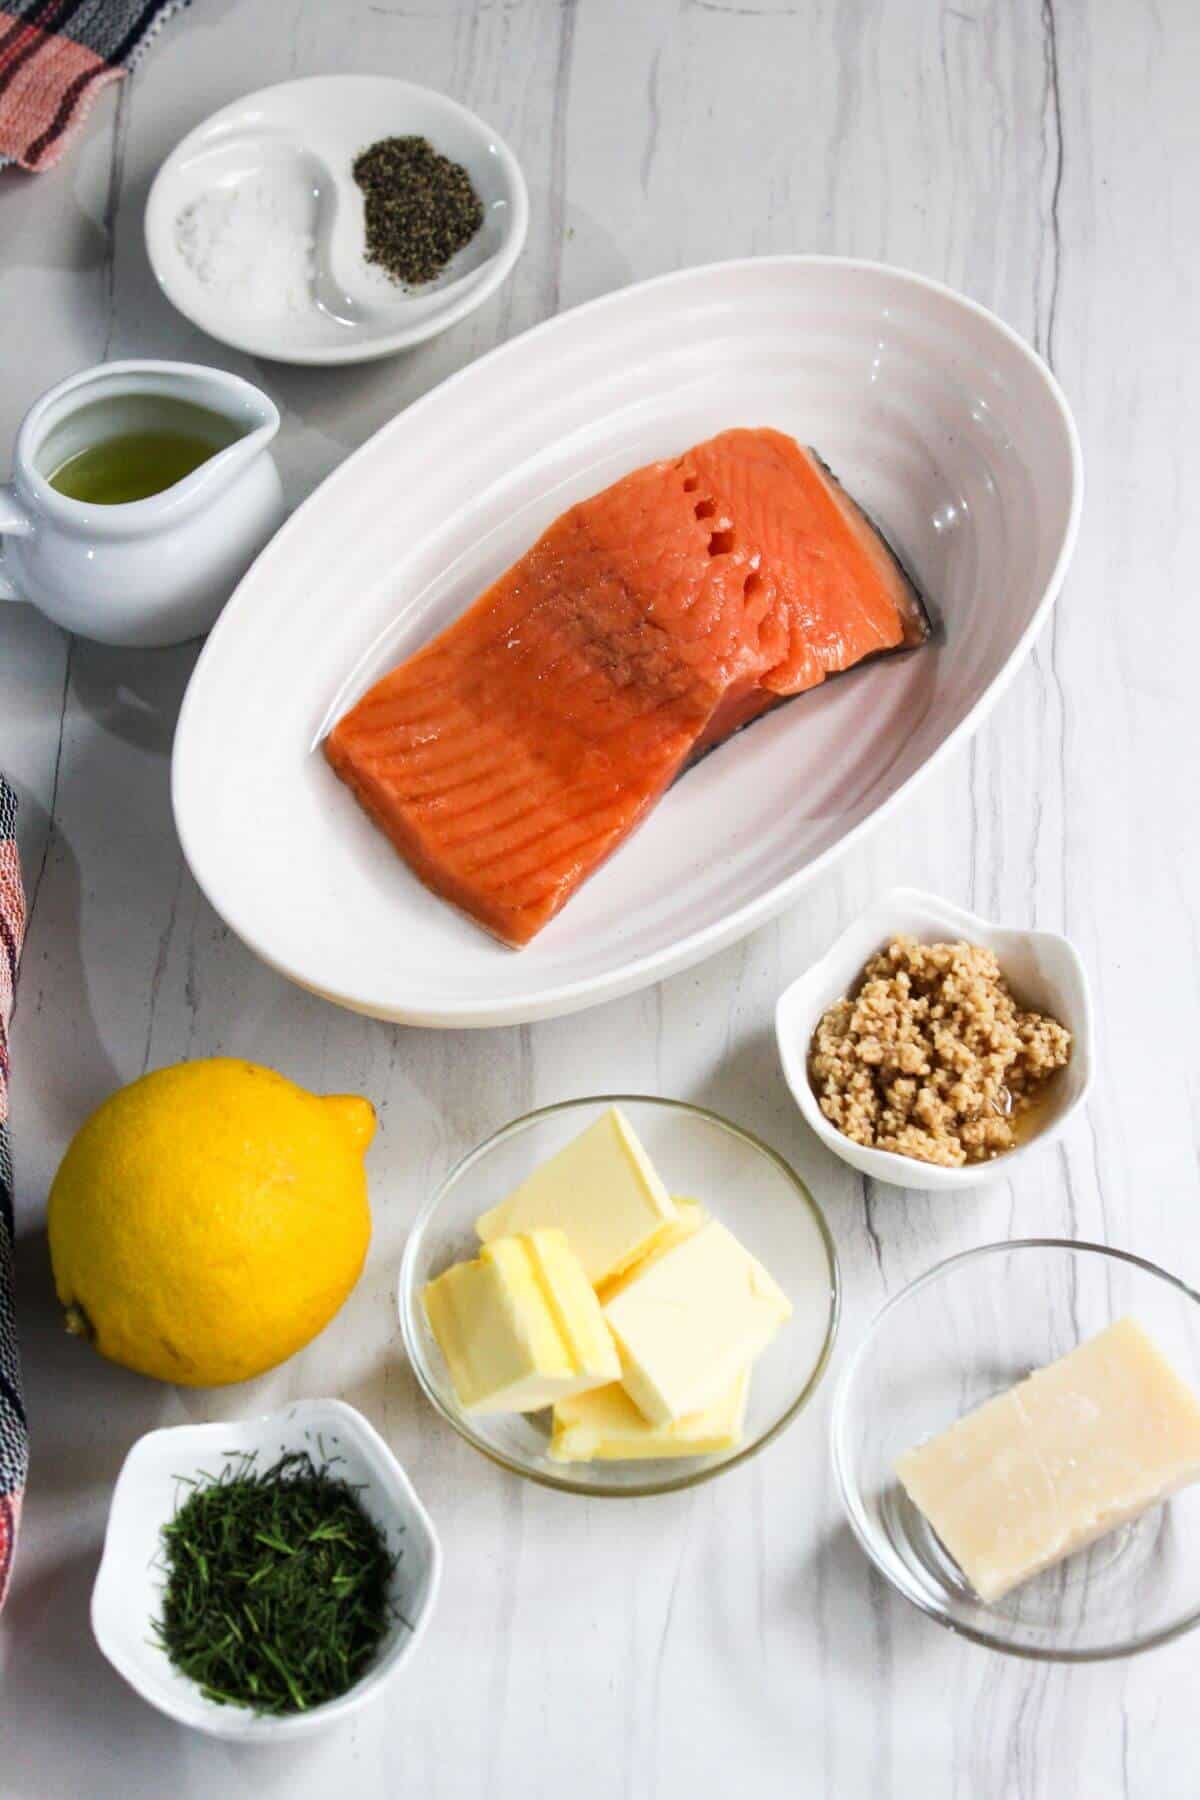 Salmon, lemon, butter and other ingredients on a white table.